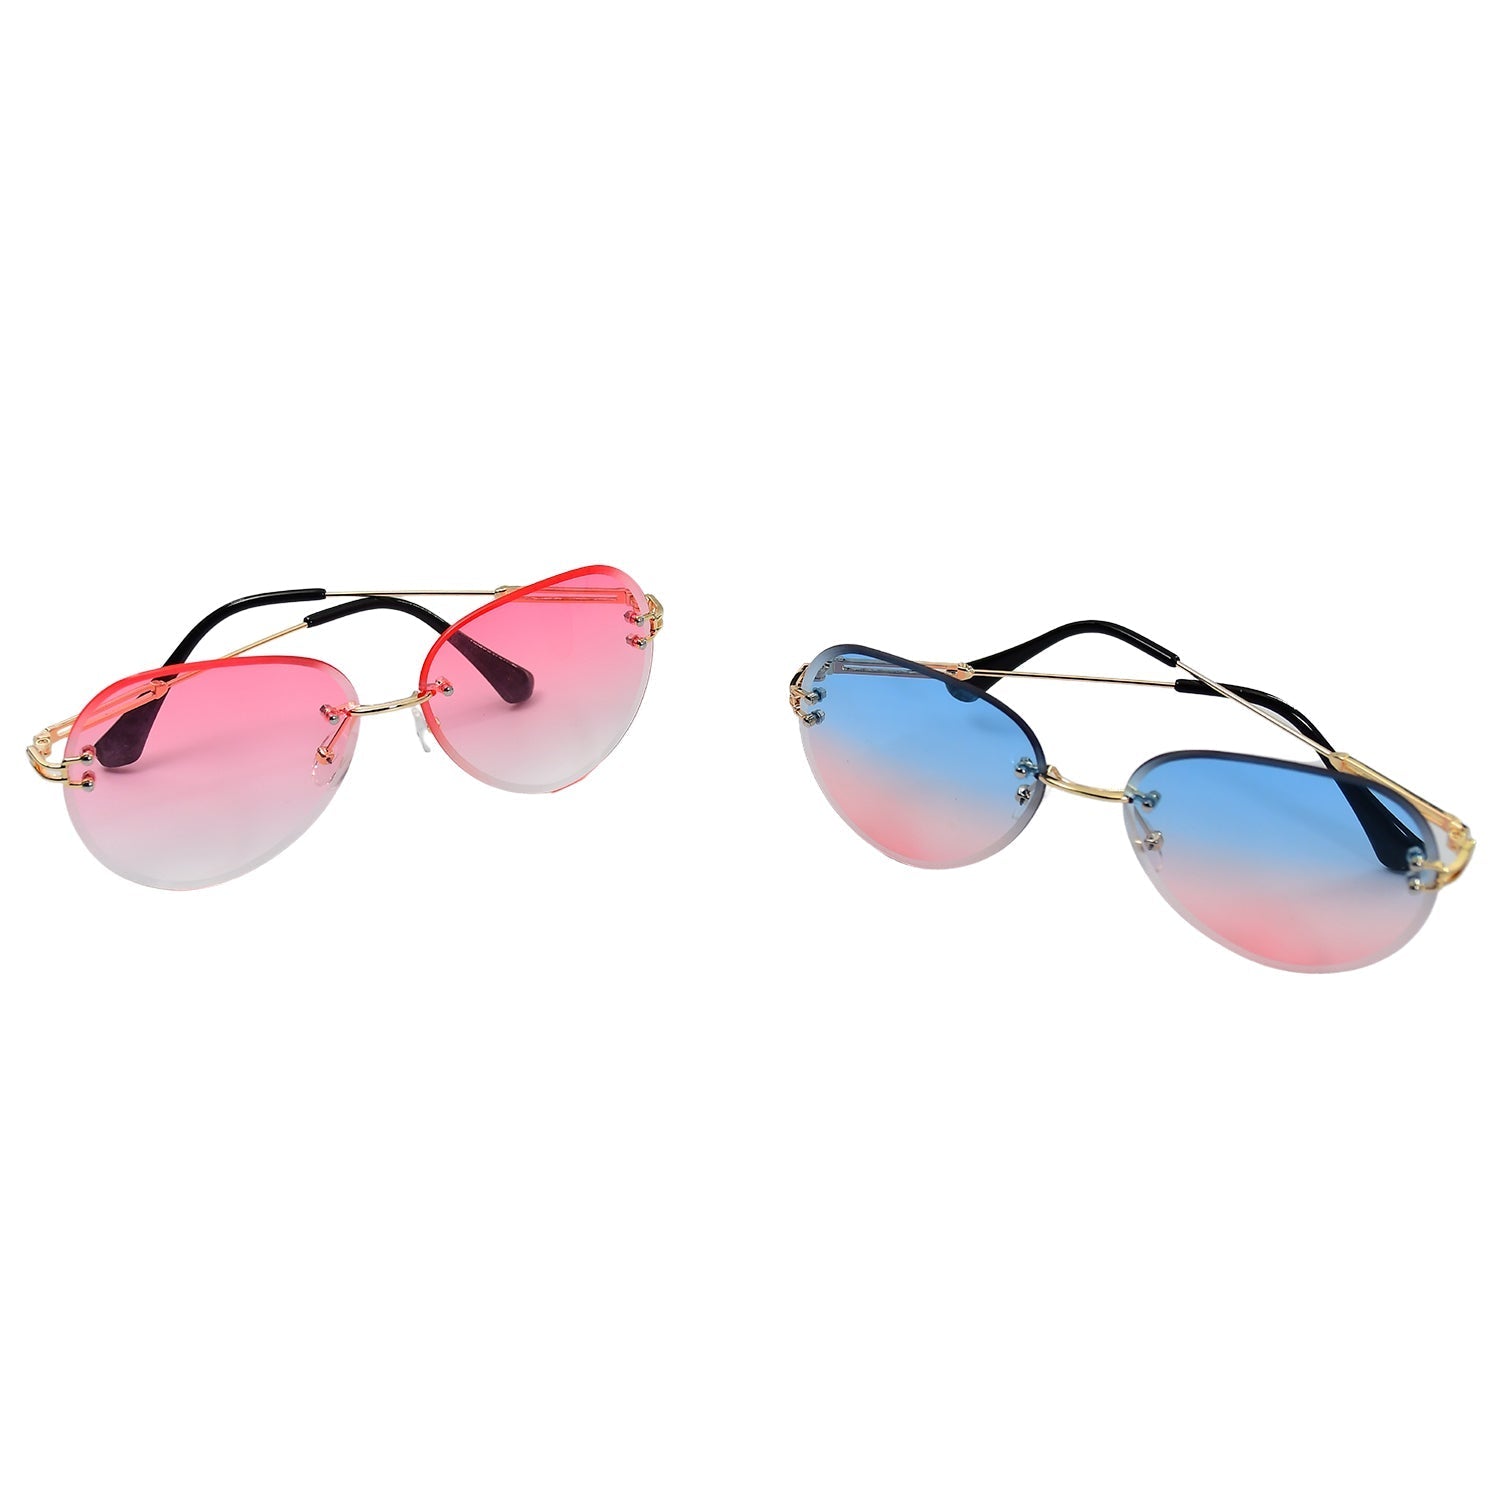 4951 1Pc Mix frame Sunglasses for men and women. Multi color and Different shape and design. DeoDap